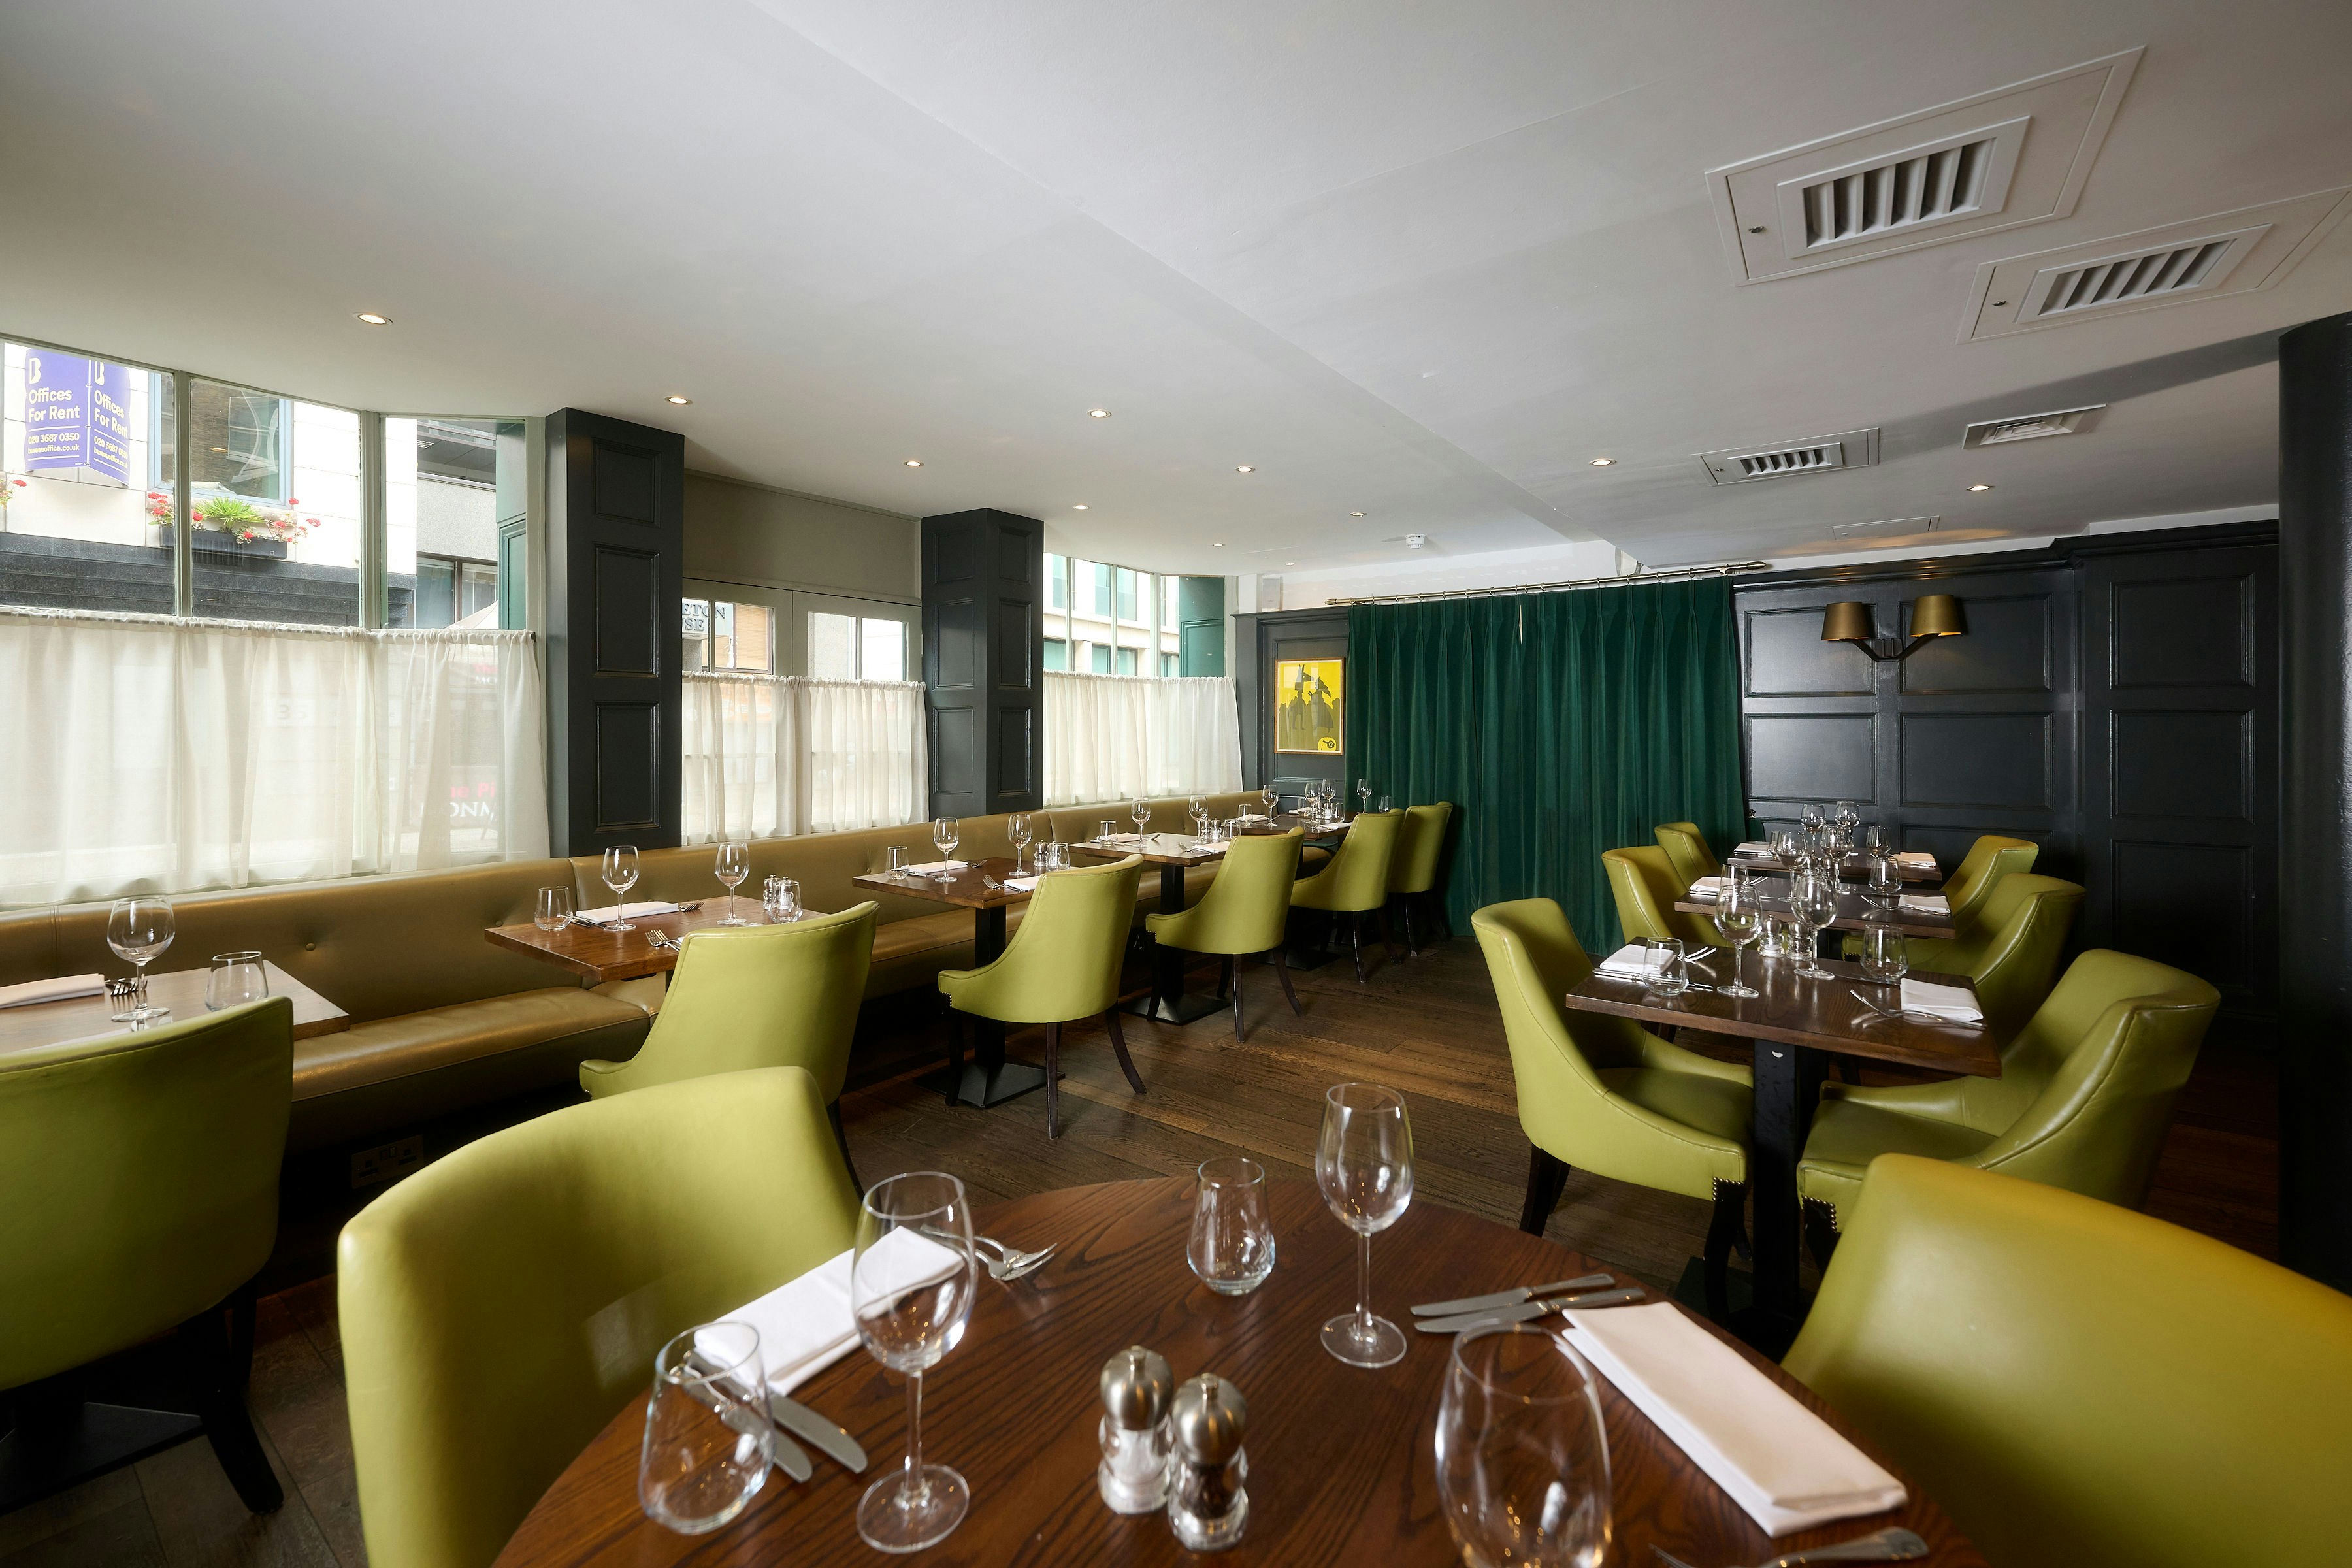 Chiswell Street Dining Rooms - Whole Venue image 2